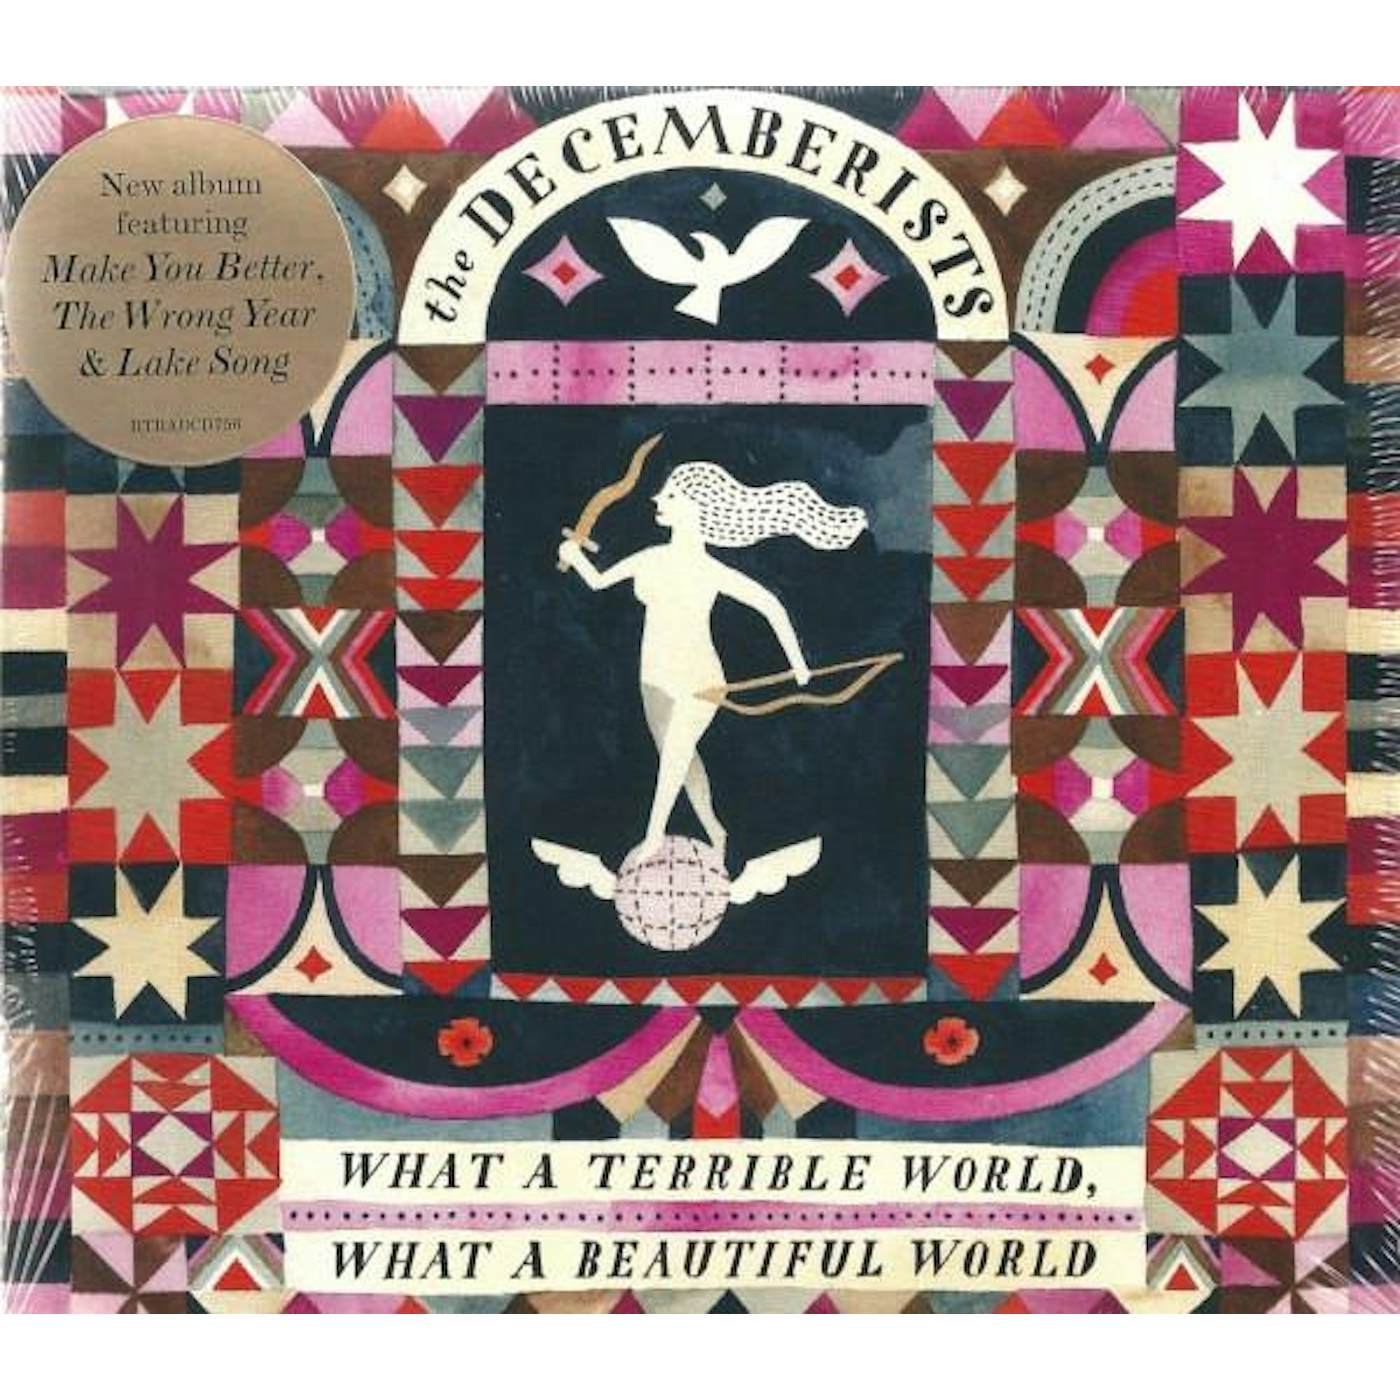 The Decemberists WHAT A TERRIBLE WORLD, WHAT A WONDERFUL WORLD CD